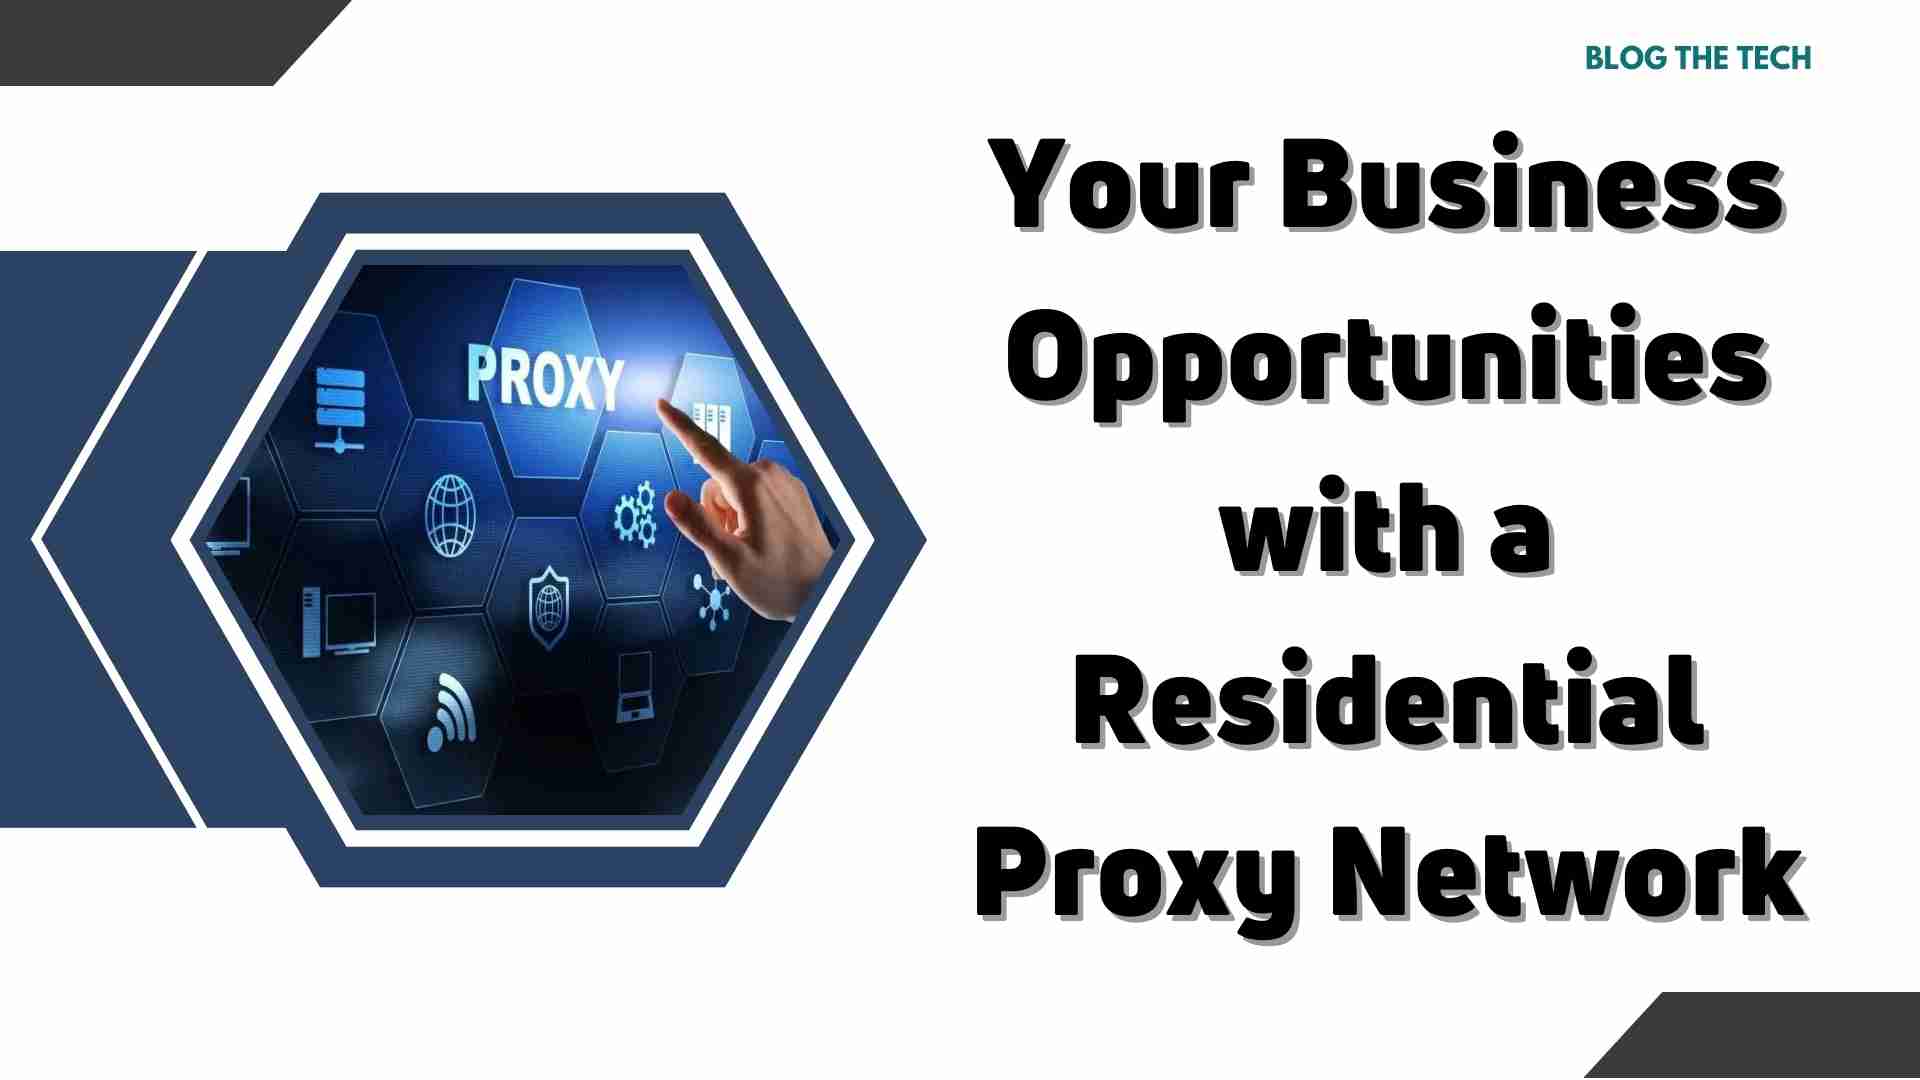 Your Business Opportunities with a Residential Proxy Network